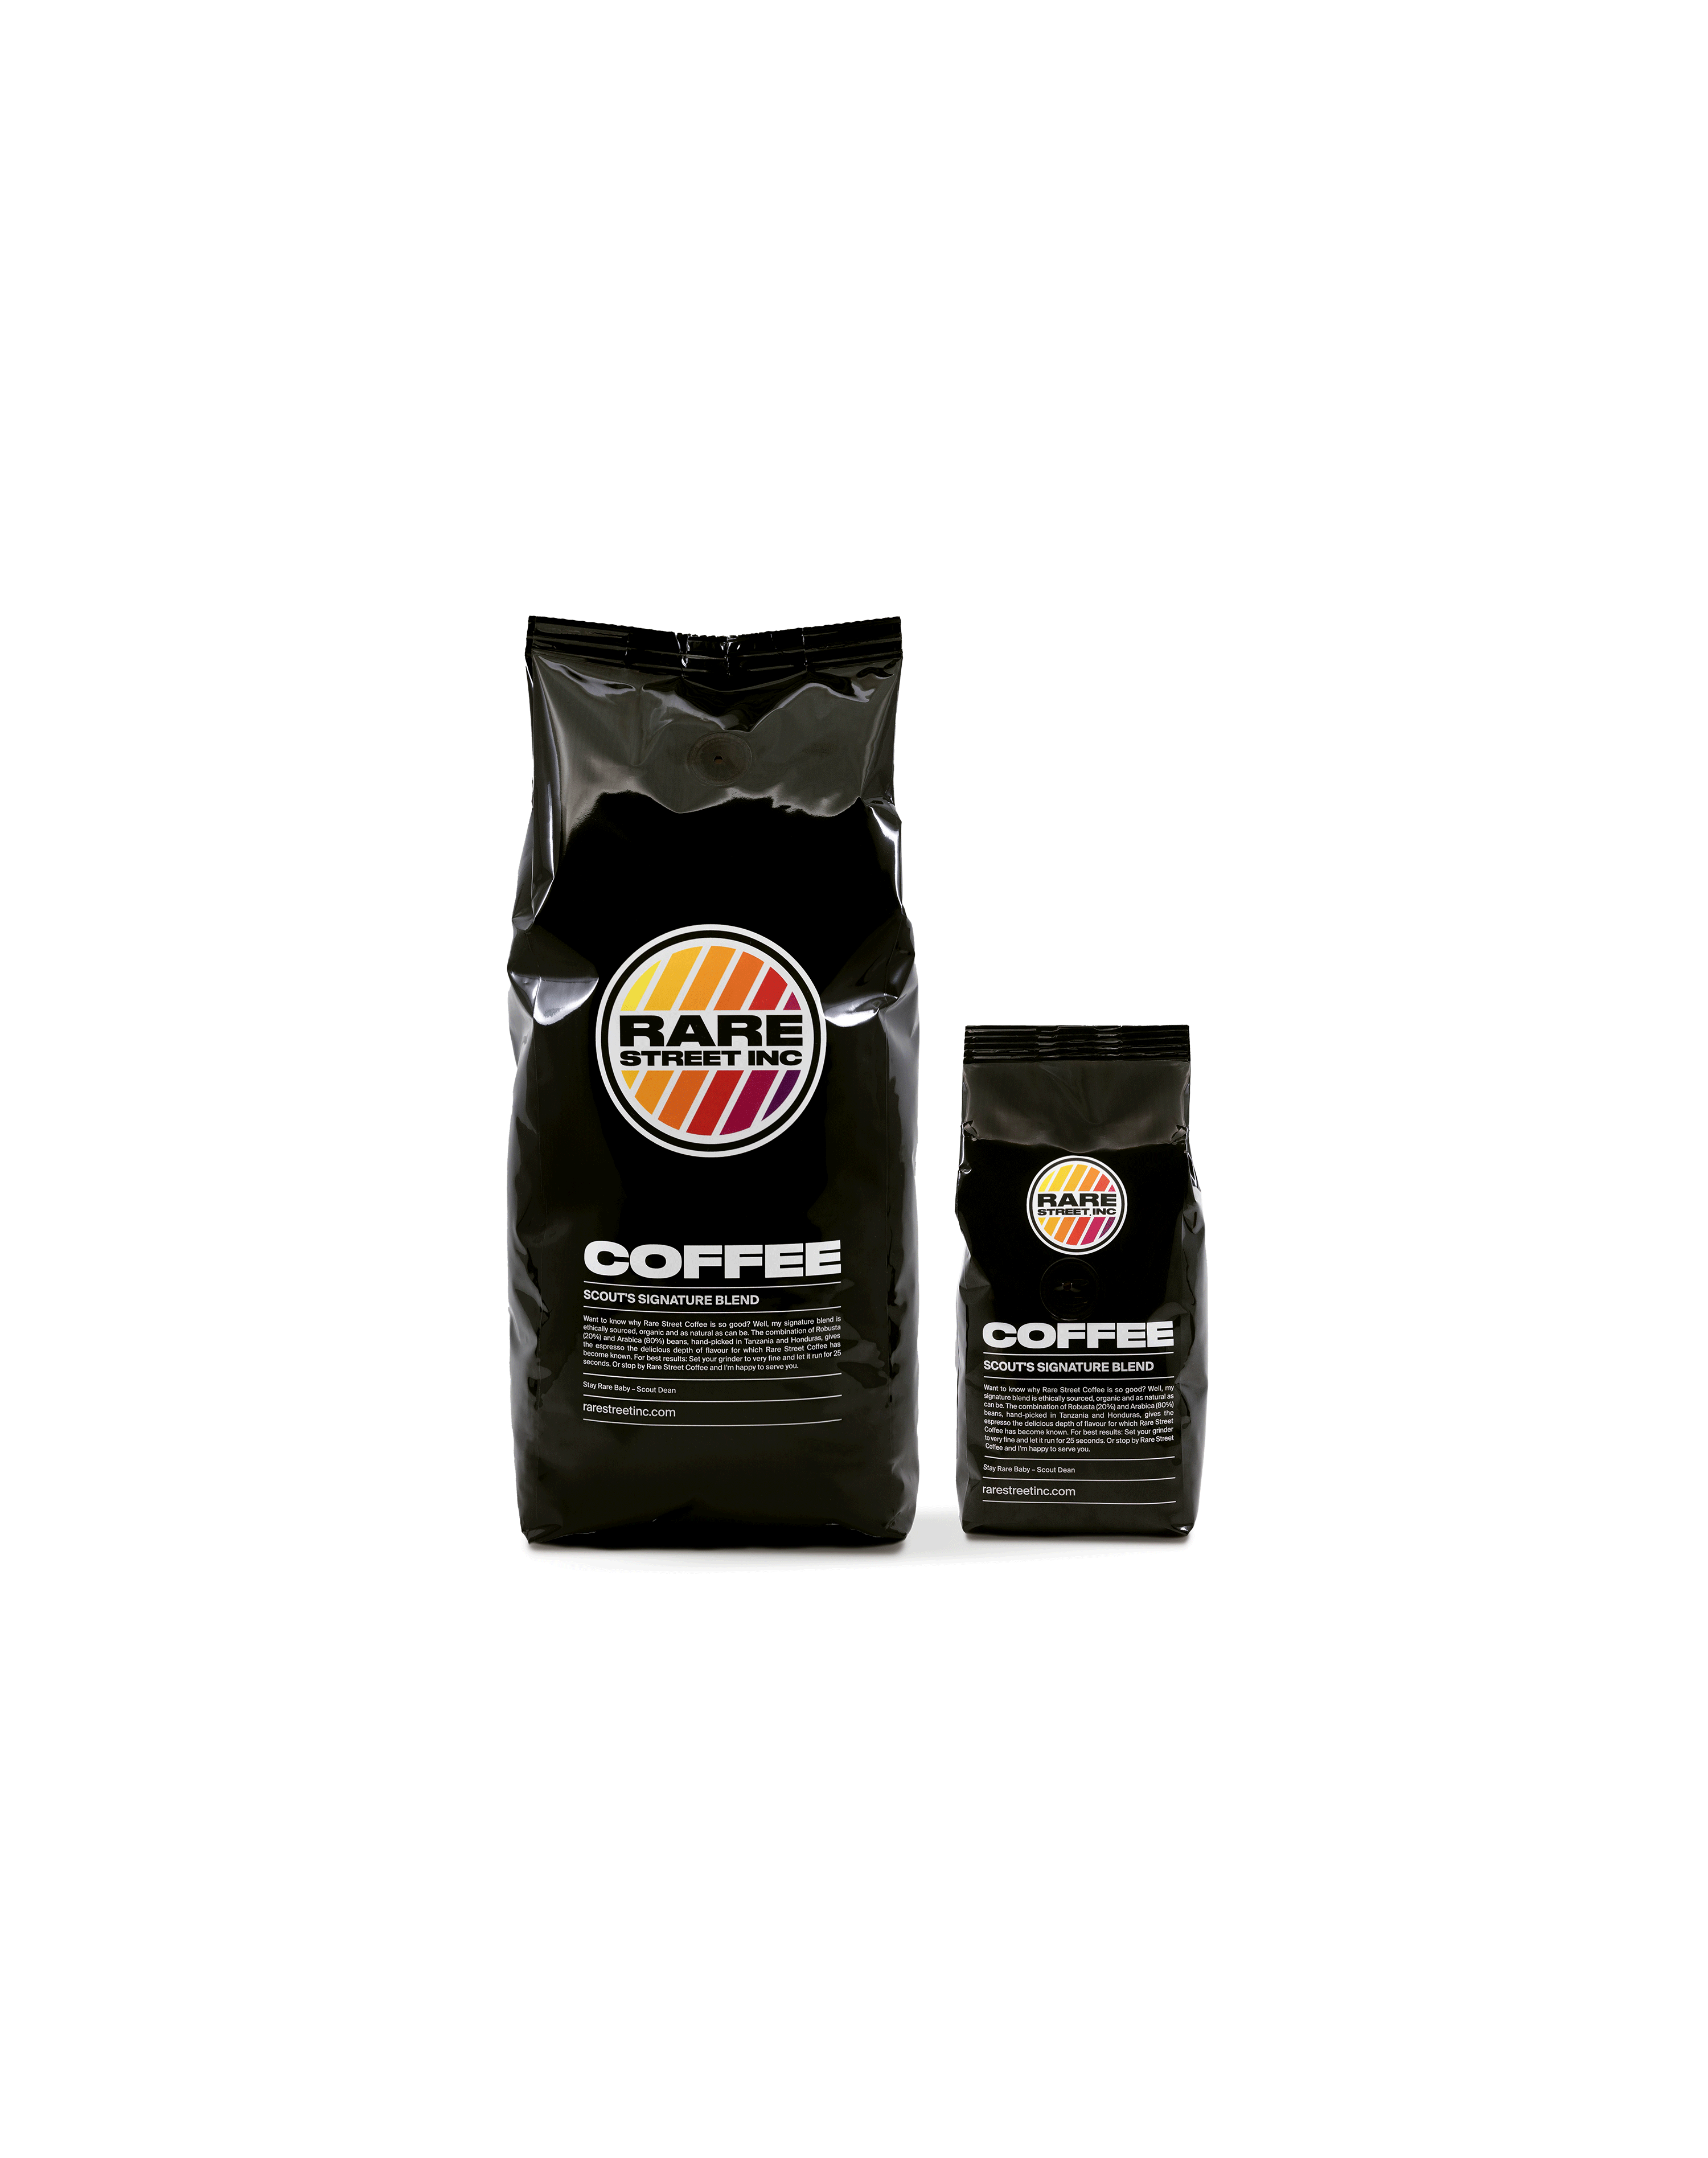 Scout's Signature Blend - Fresh Coffee Beans